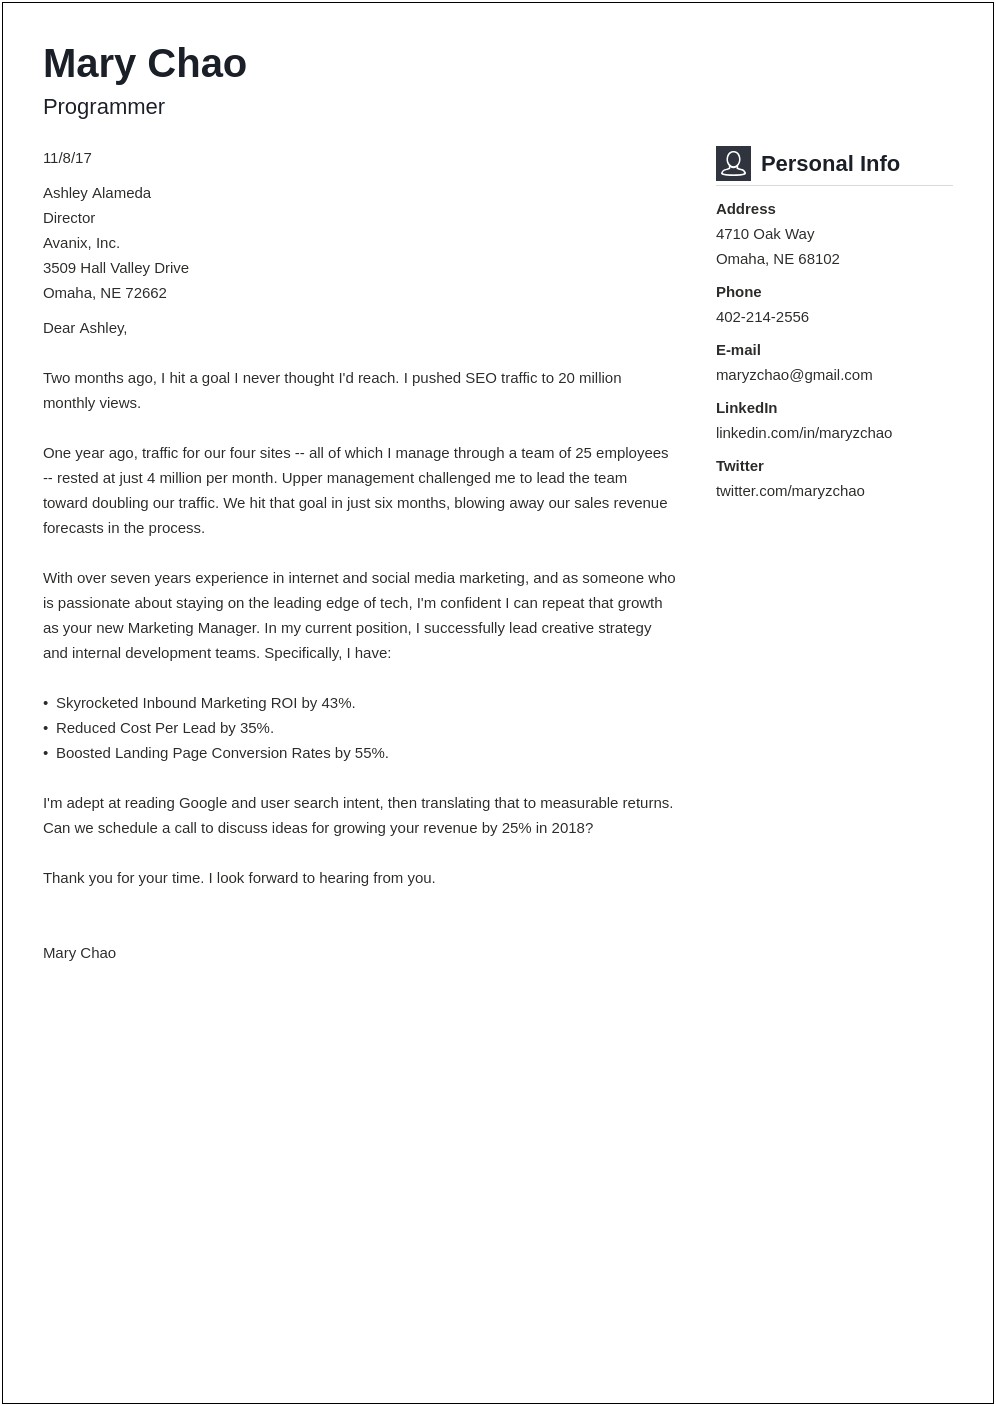 Pdf Cover Letter Resume Is Enclosed